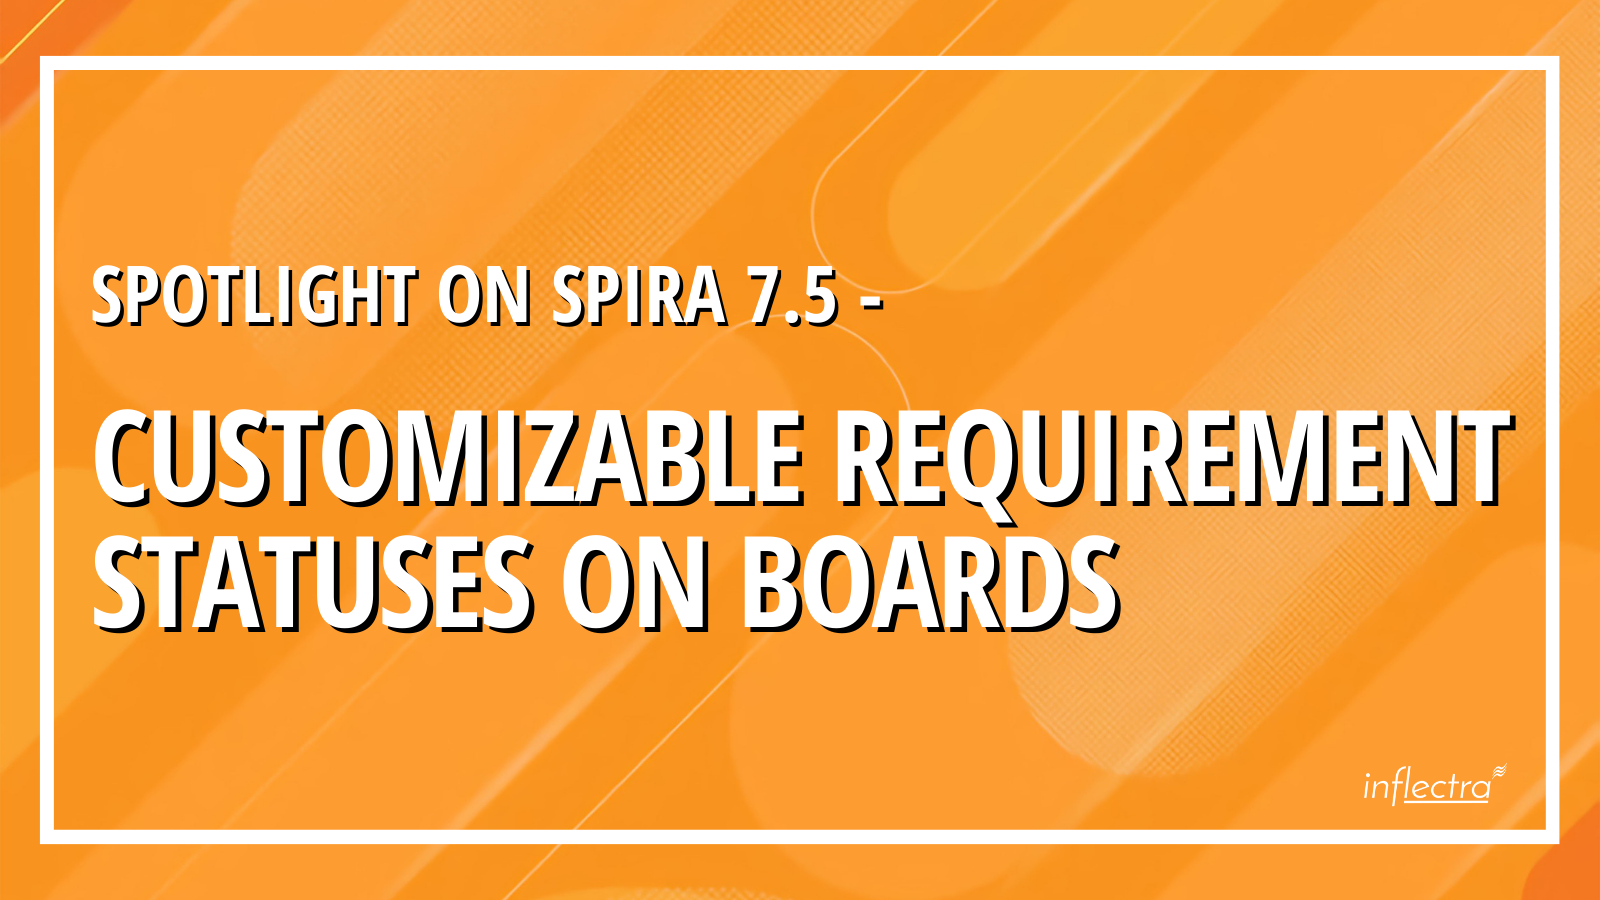 spotlight-spira-75-customizable-requirement-statuses-on-boards-inflectra-image